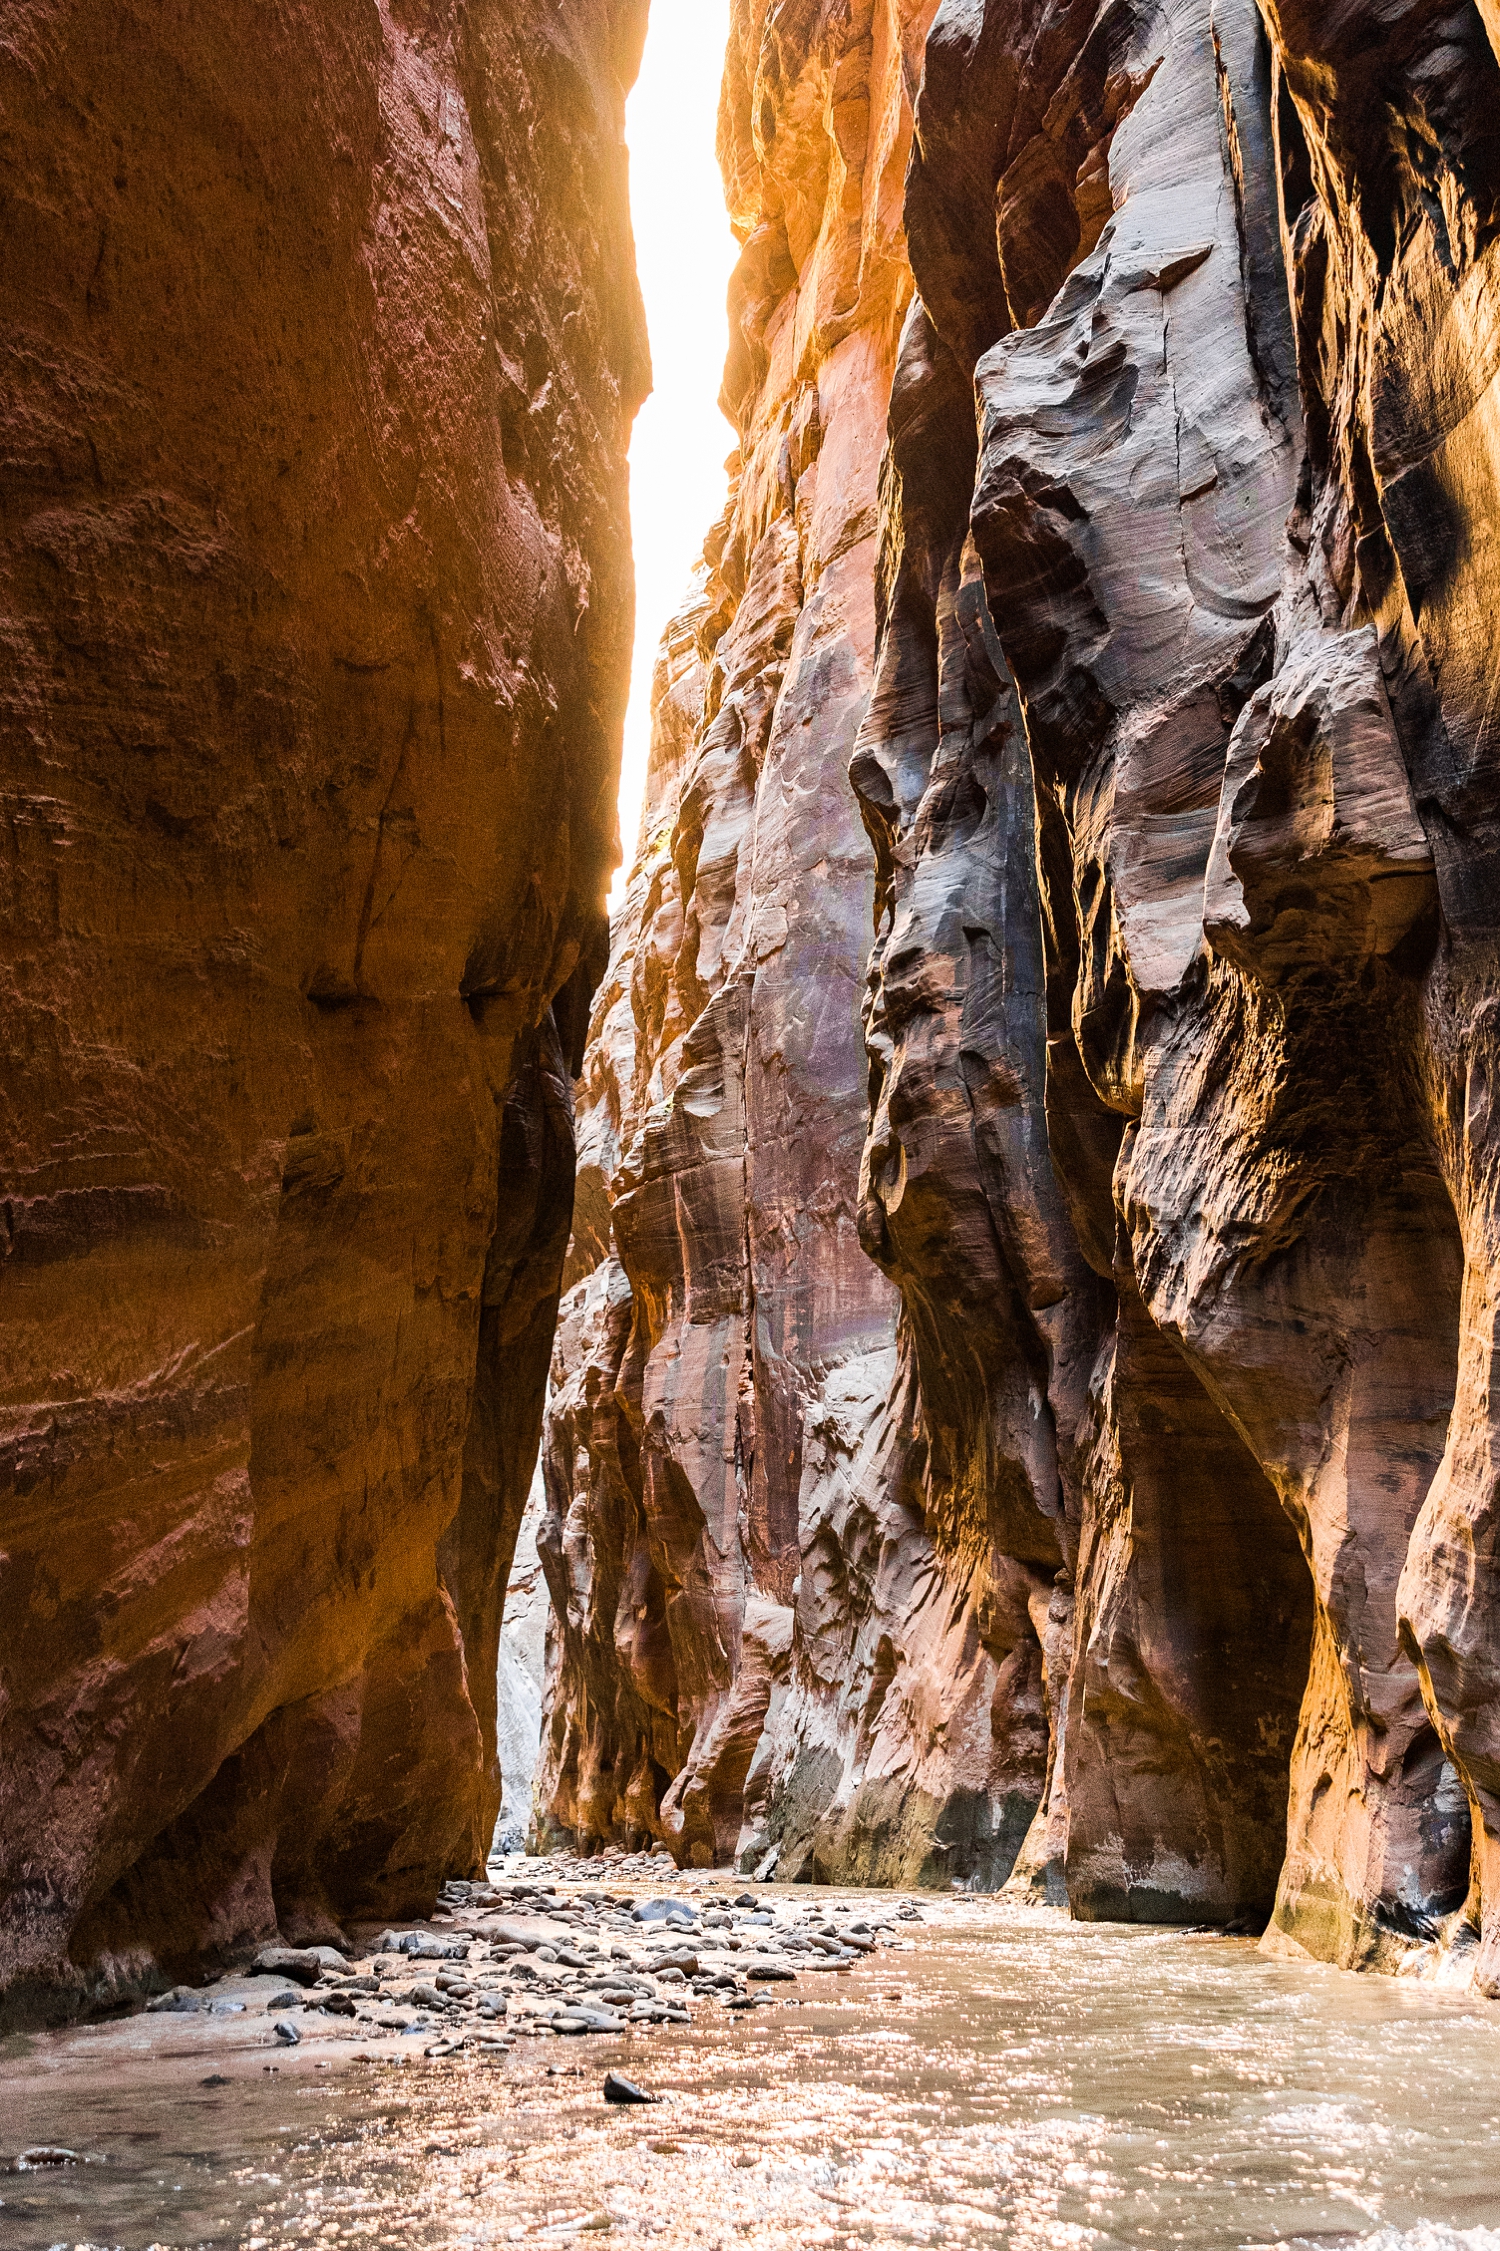 Sunrise light shines through the canyon in the Wall Street section of the Narrows hike at Zion National Park | CB Studio